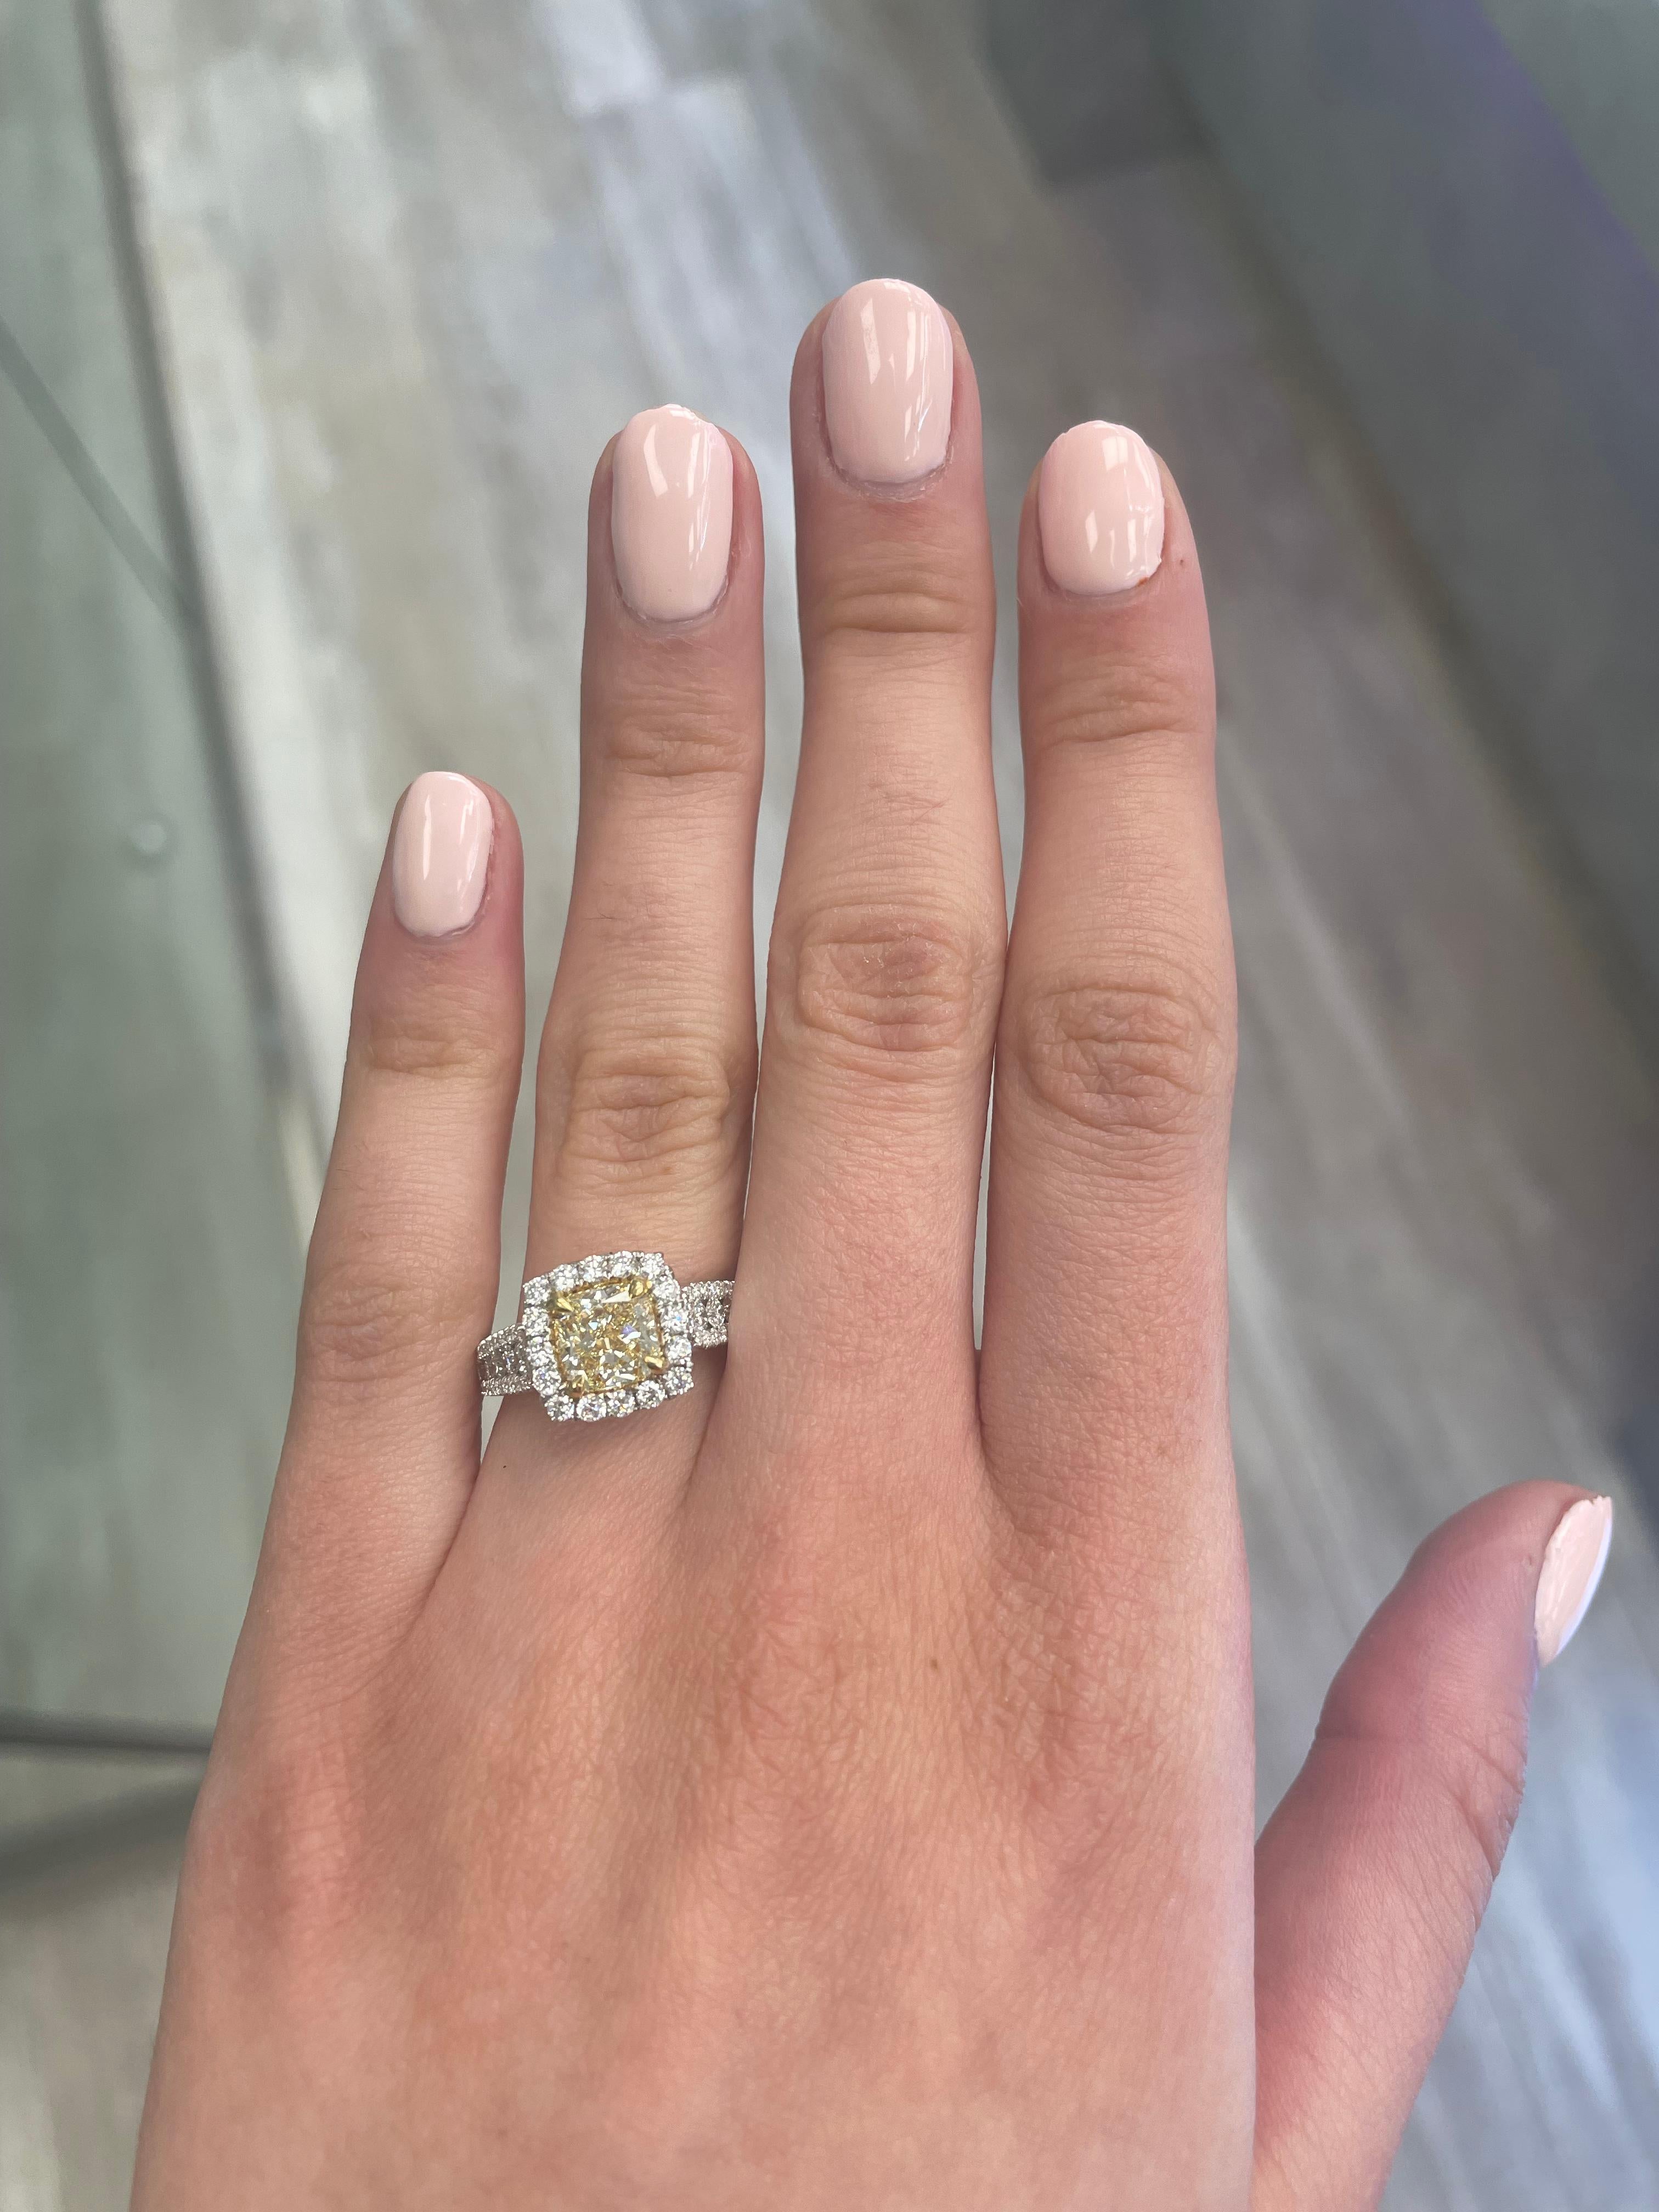 Stunning modern EGL certified yellow diamond with halo ring, two-tone 18k yellow and white gold. By Alexander Beverly Hills
2.47 carats total diamond weight.
1.61 carat cushion cut Fancy Intense Yellow color and VS1 clarity diamond, EGL graded.